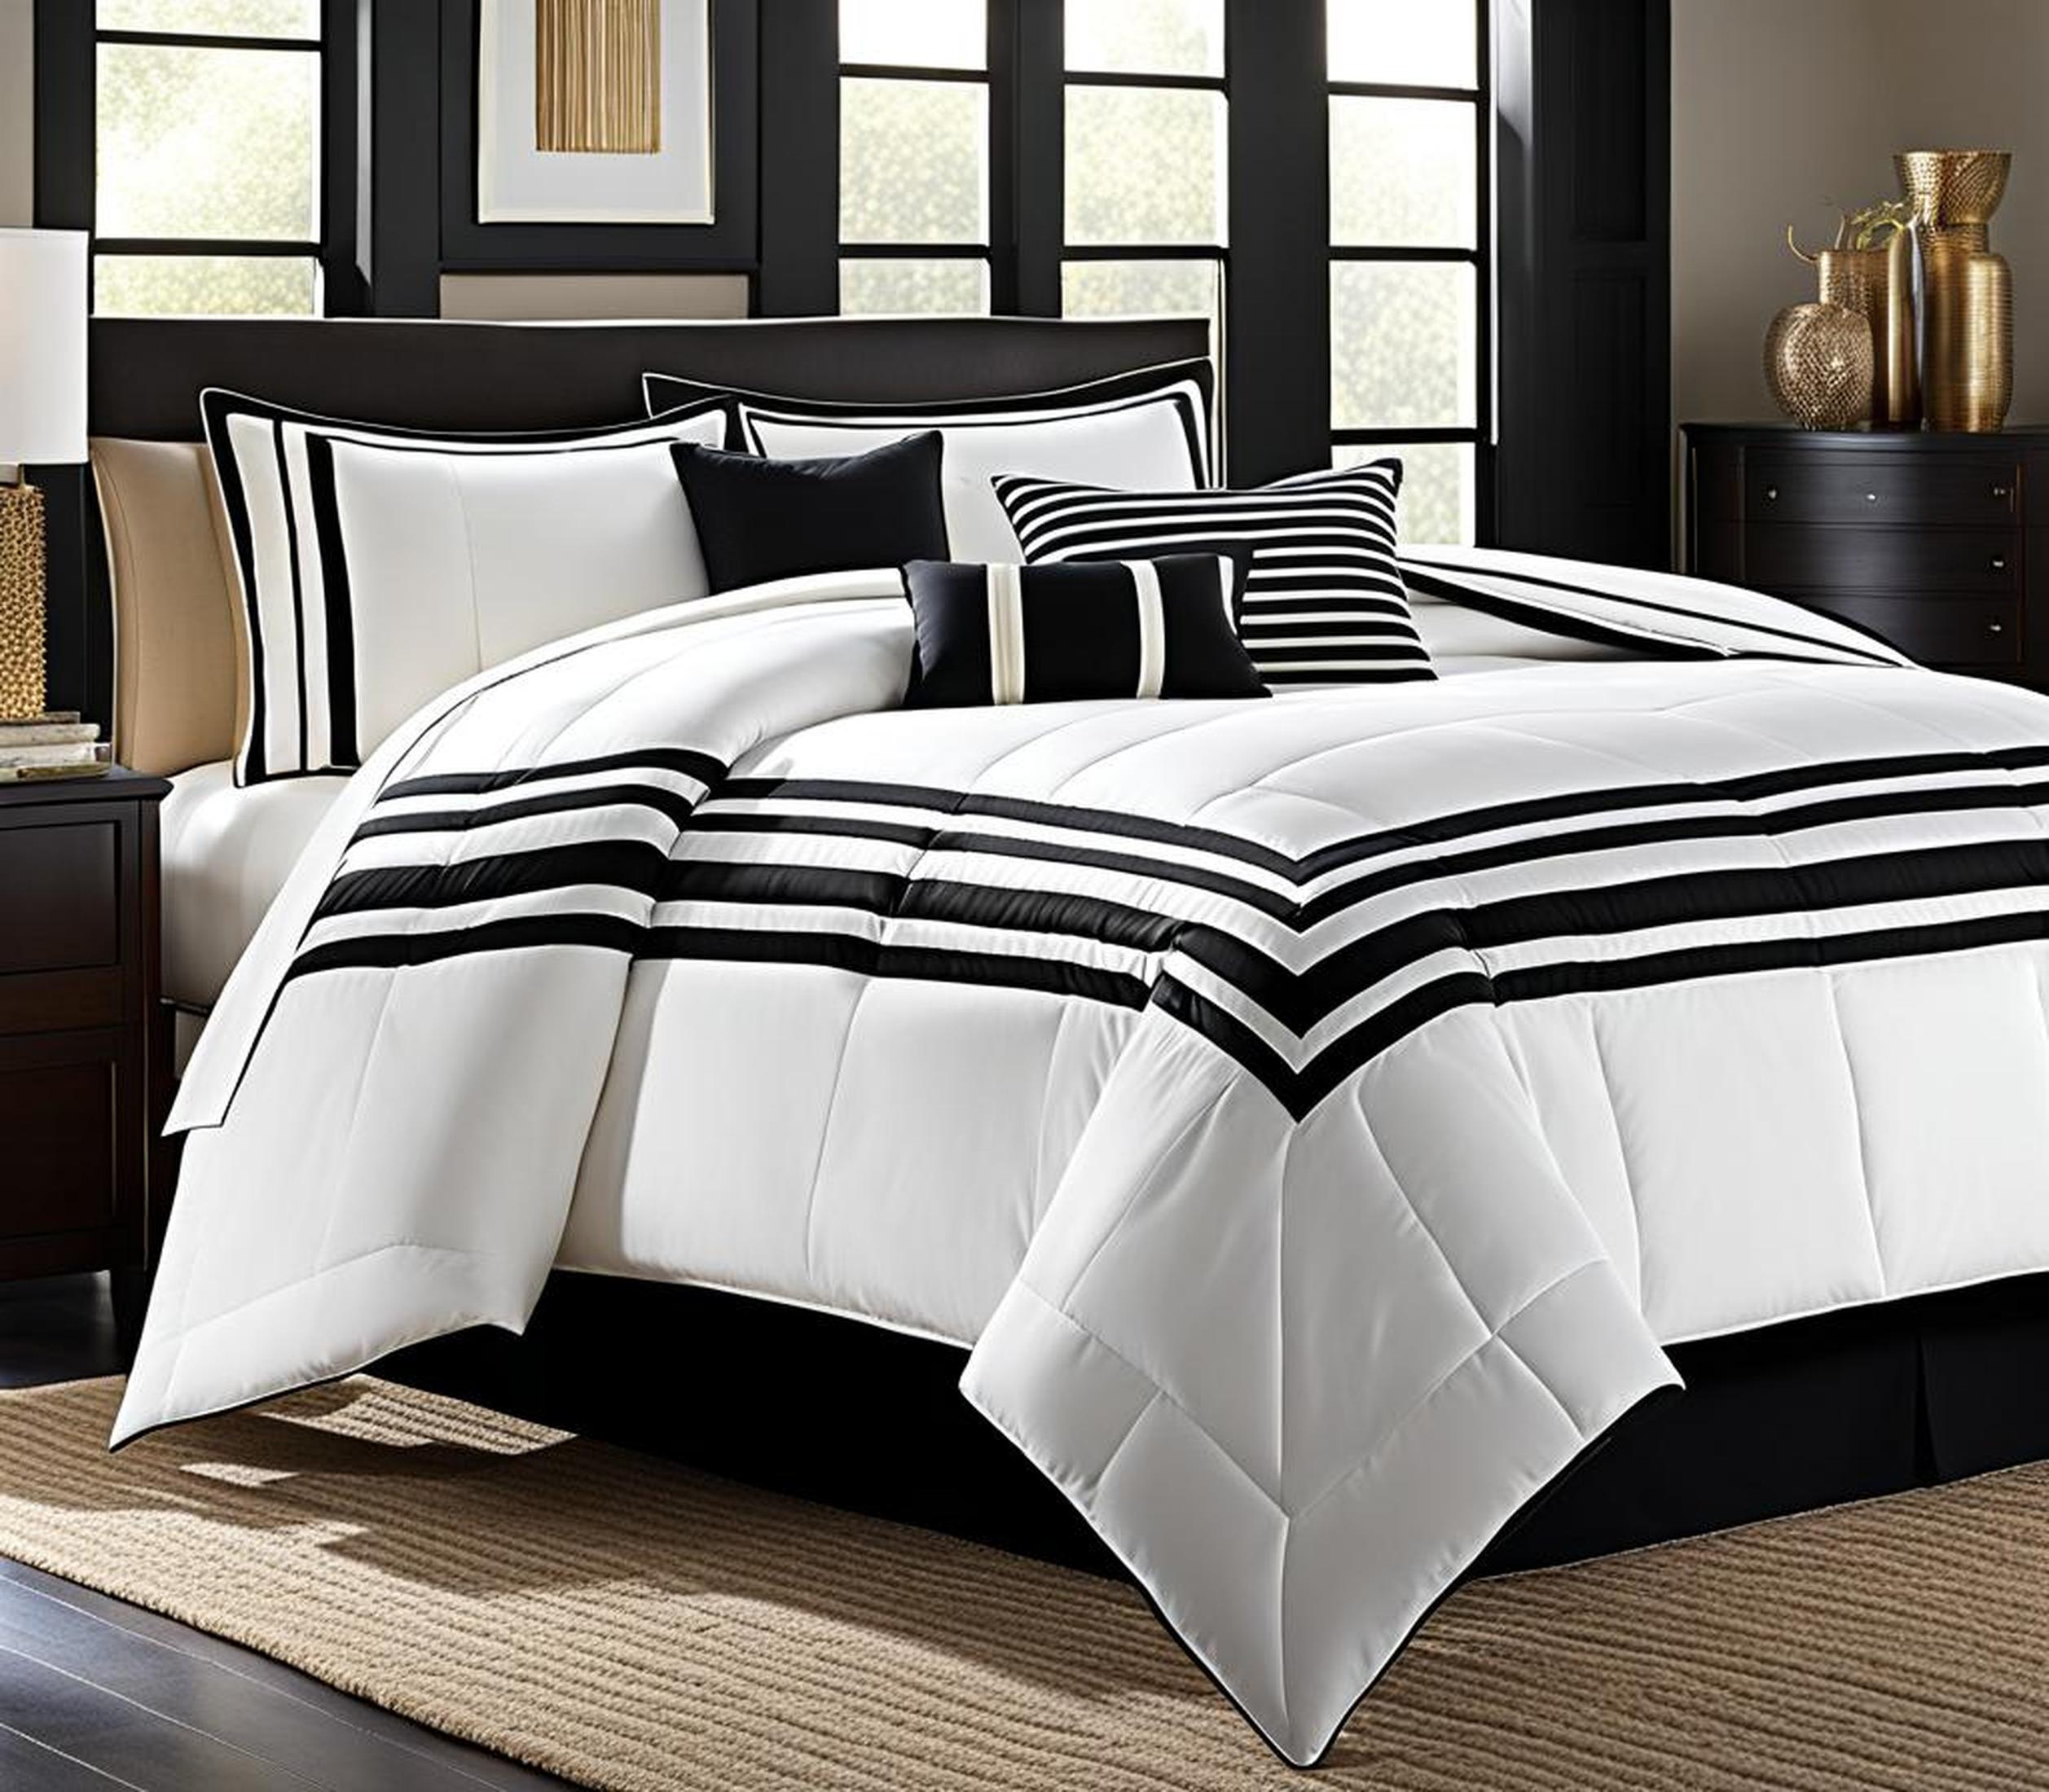 black and white king comforters